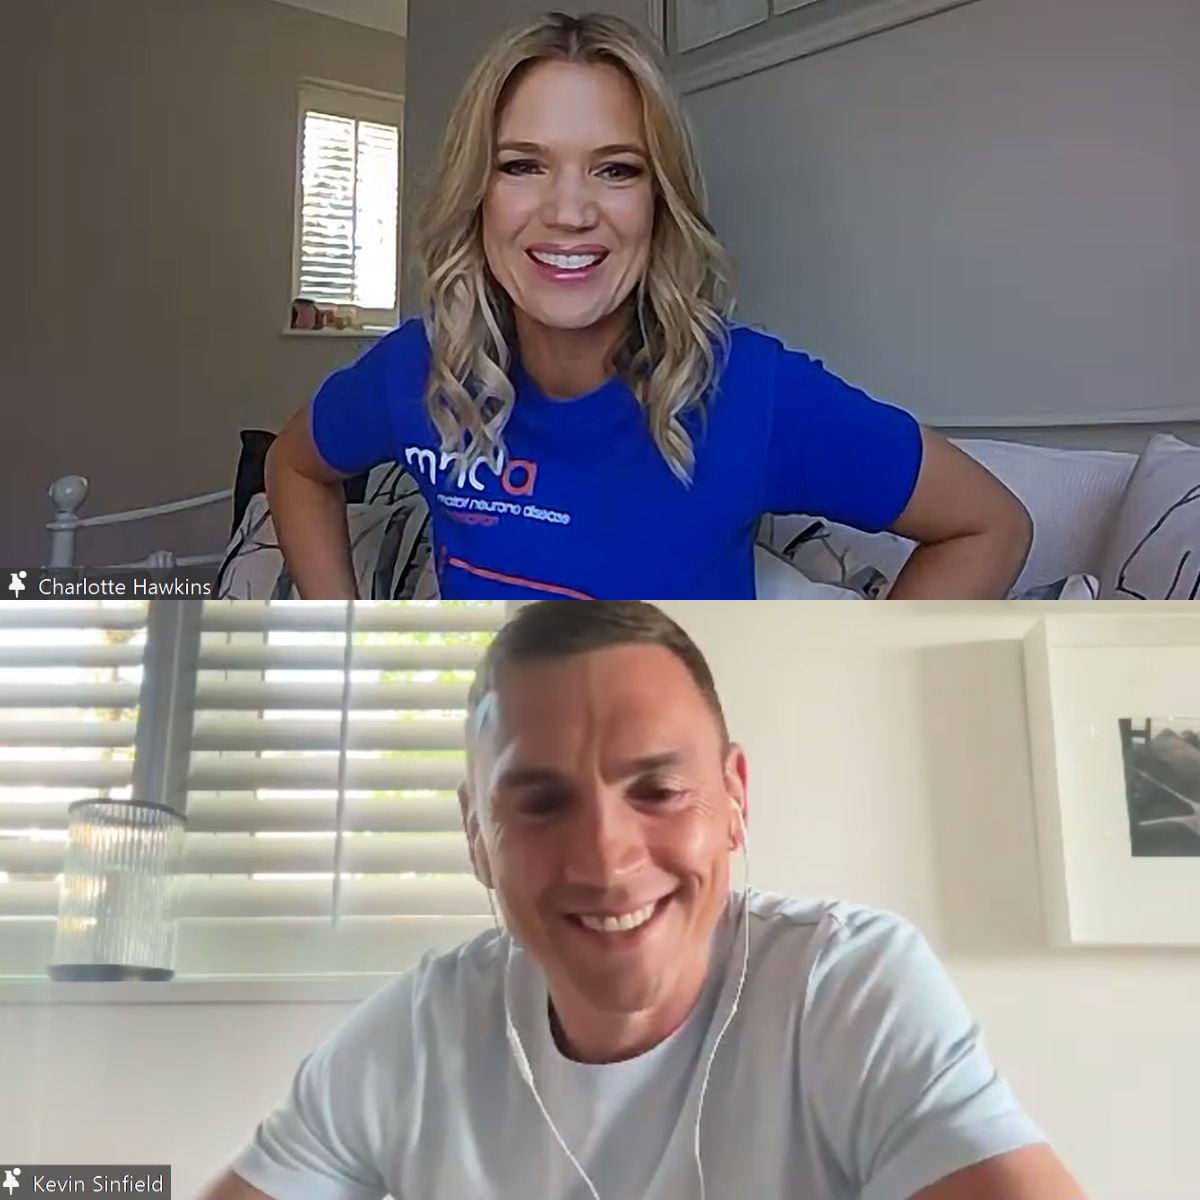 Charlotte Hawkins and Kevin Sinfield on a zoom call